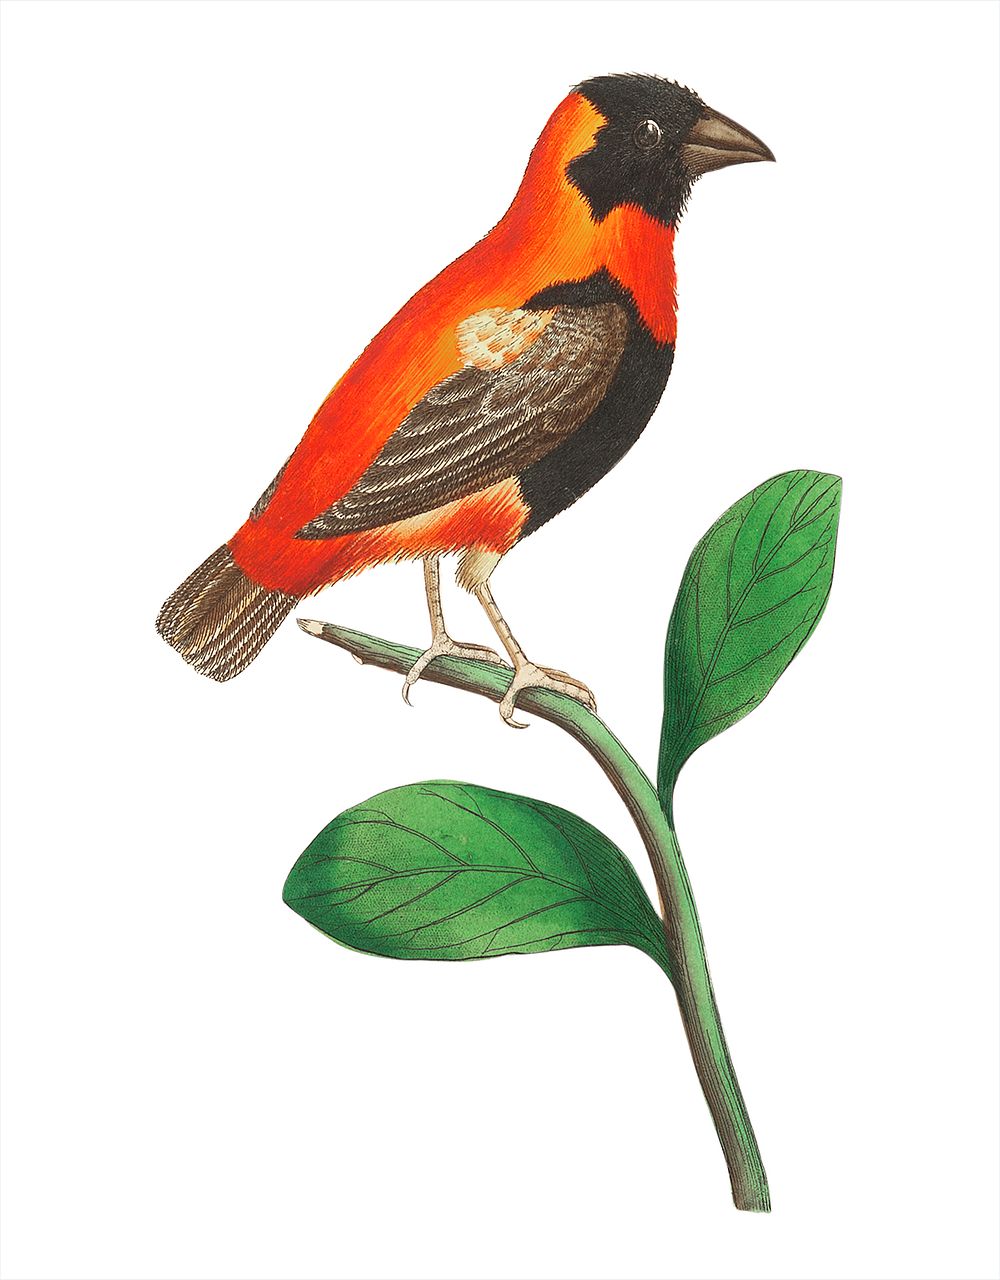 Grenadier grosbeak illustration from The Naturalist's Miscellany (1789-1813) by George Shaw (1751-1813)